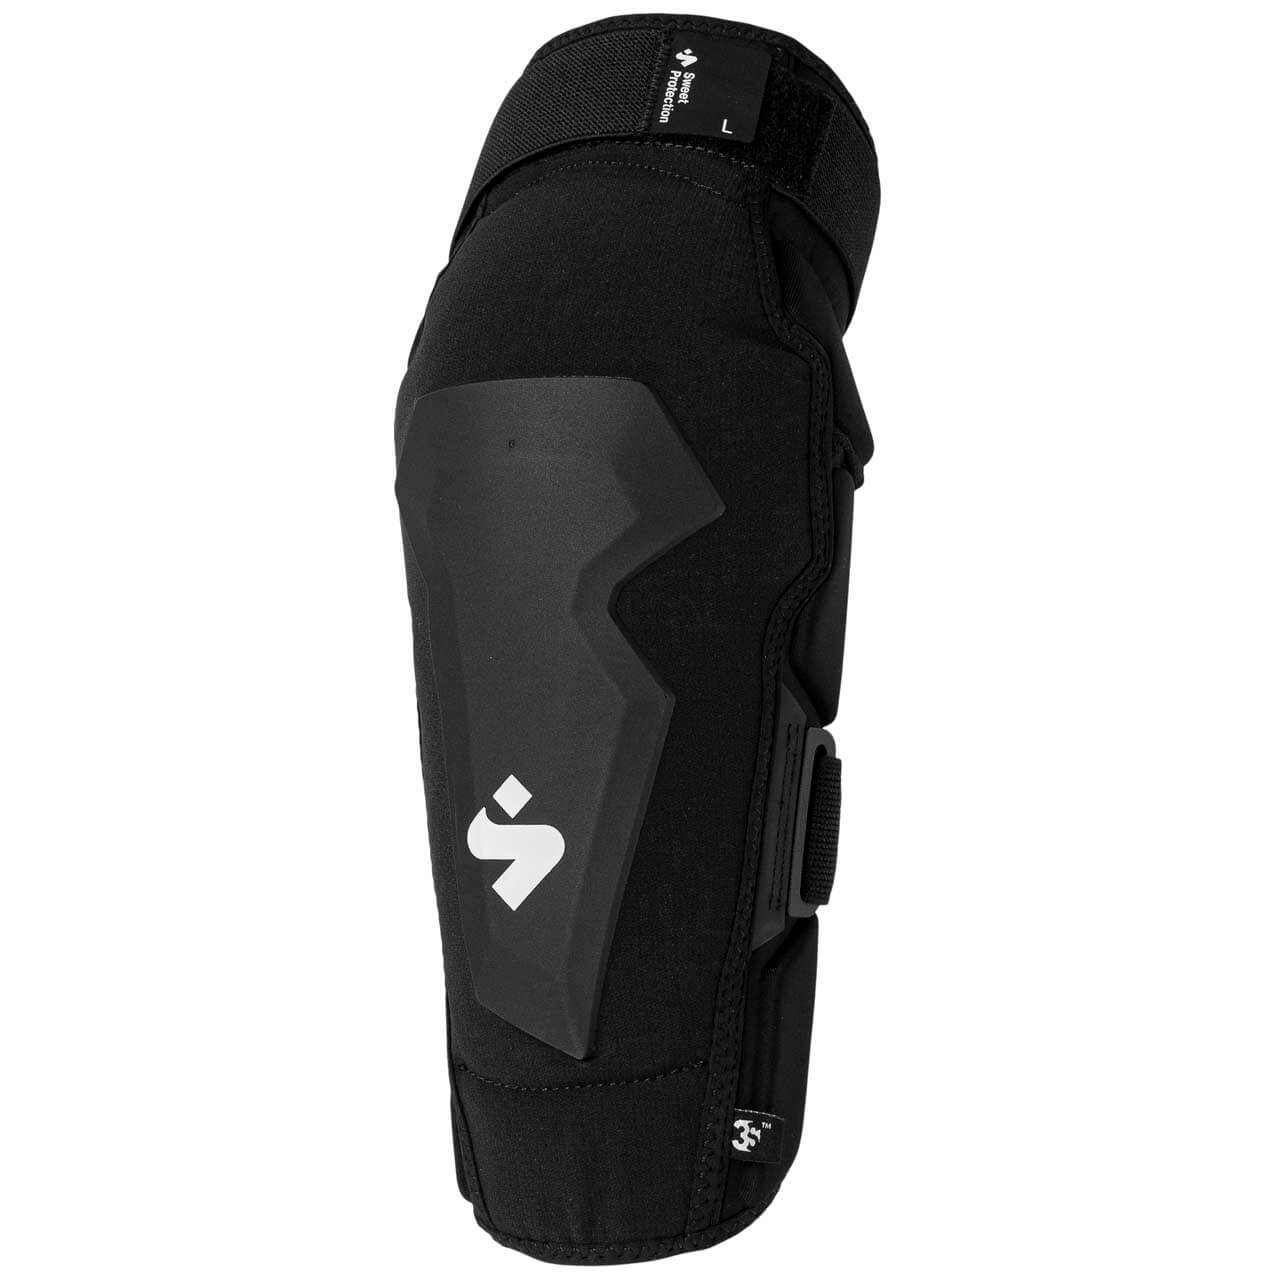 Sweet Protection Knee Guards Pro - Black, XL